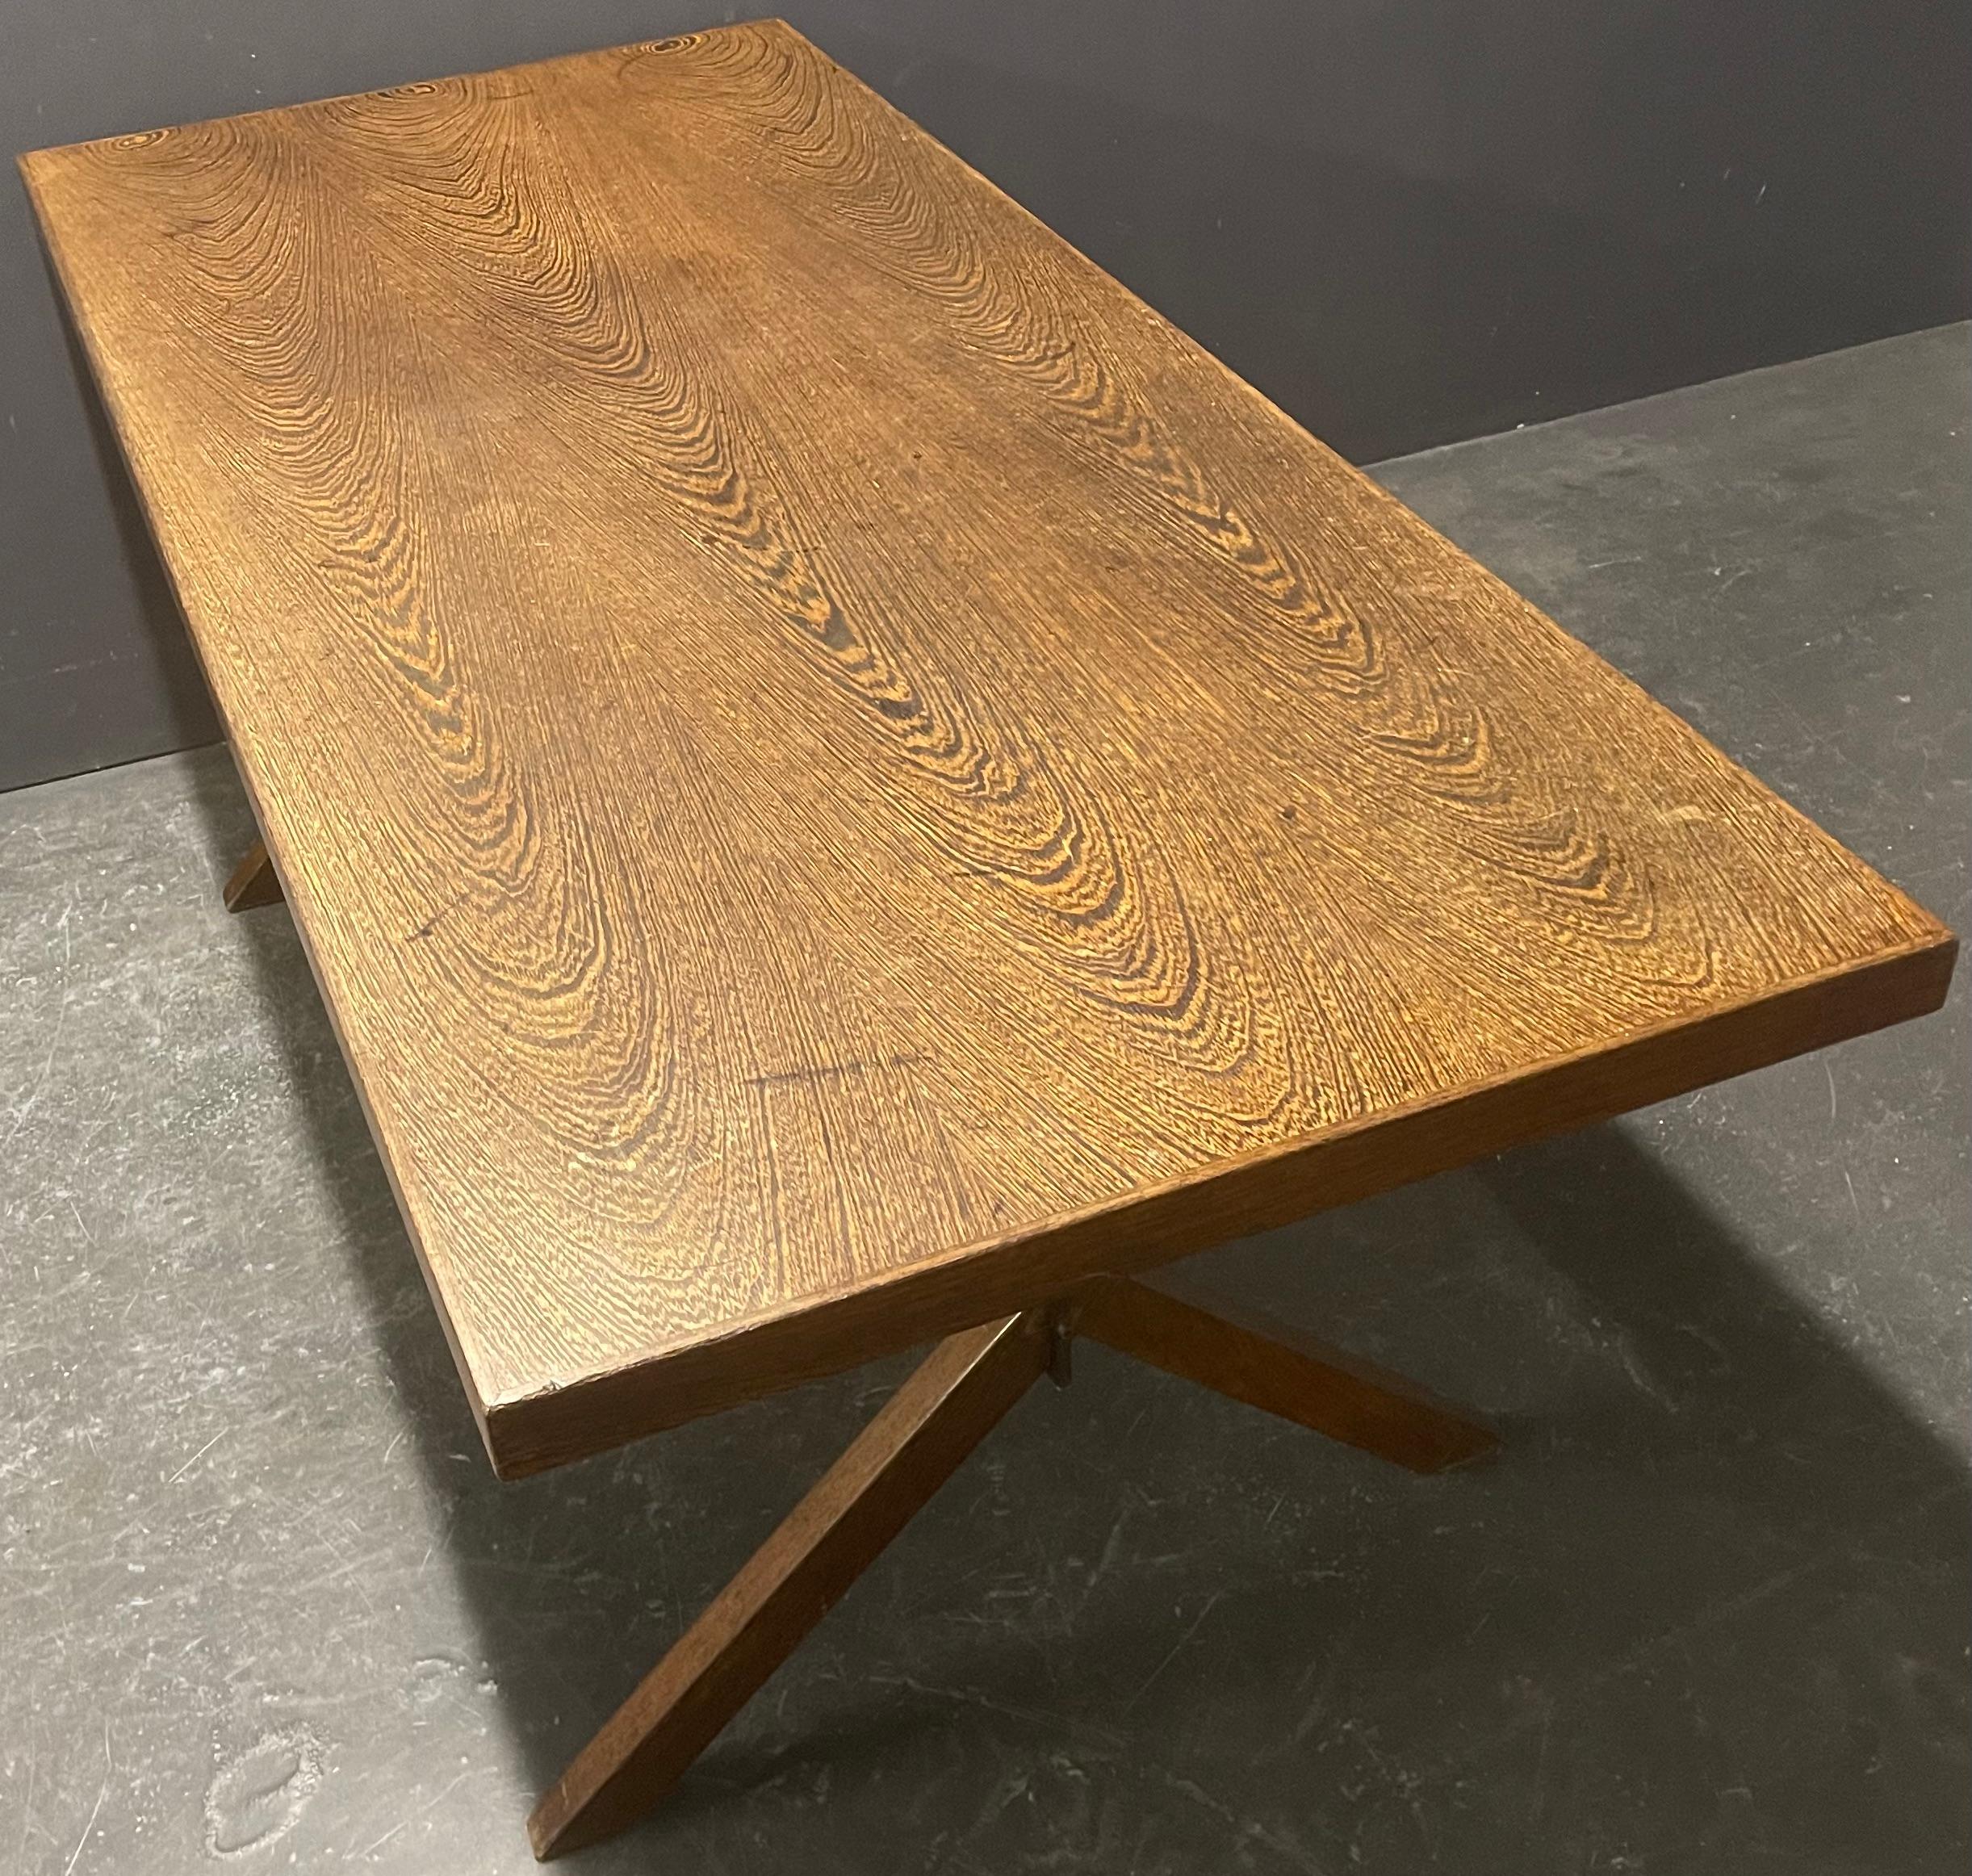 Modernist massive wenge dining table from the 1960s, retailed by the dutch exclusive department store metz & co. very intelligent and minimalistic design - easy to disassemble to store or ship for a reasonable price.